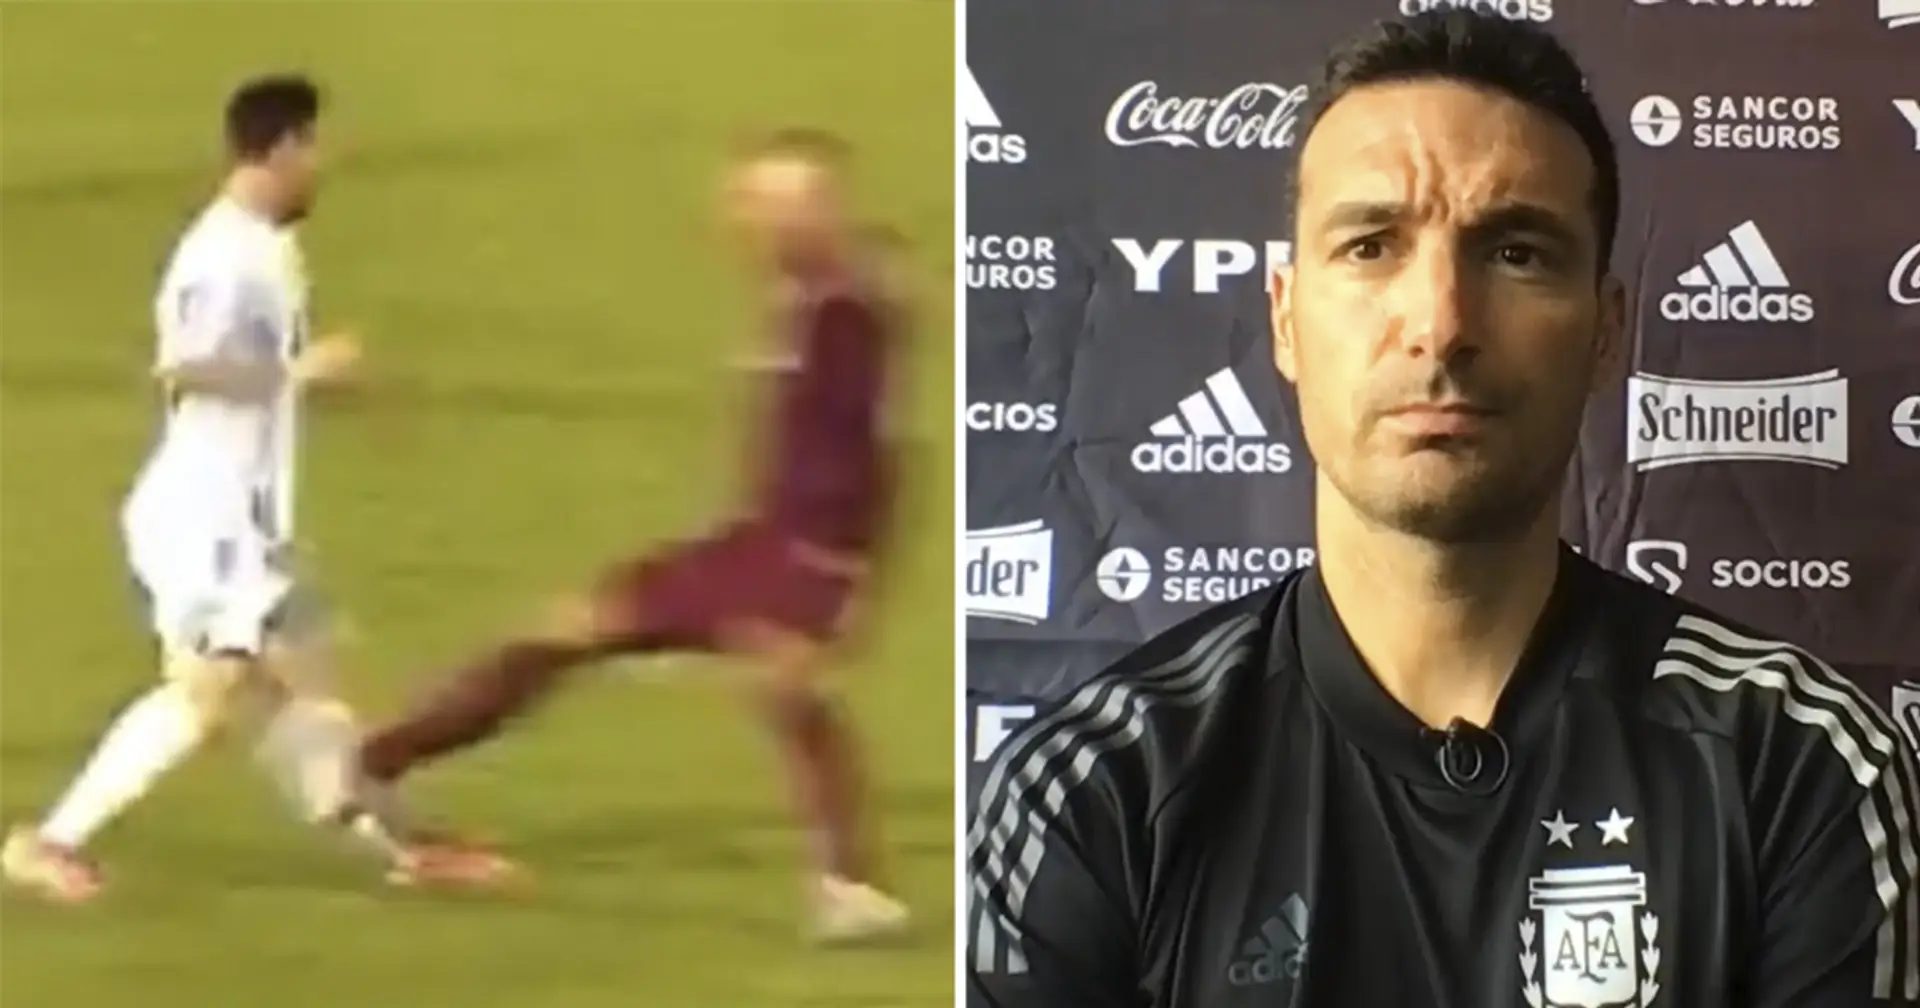 'It was really scary': Argentina boss reacts to Venezuela player's horror tackle on Messi